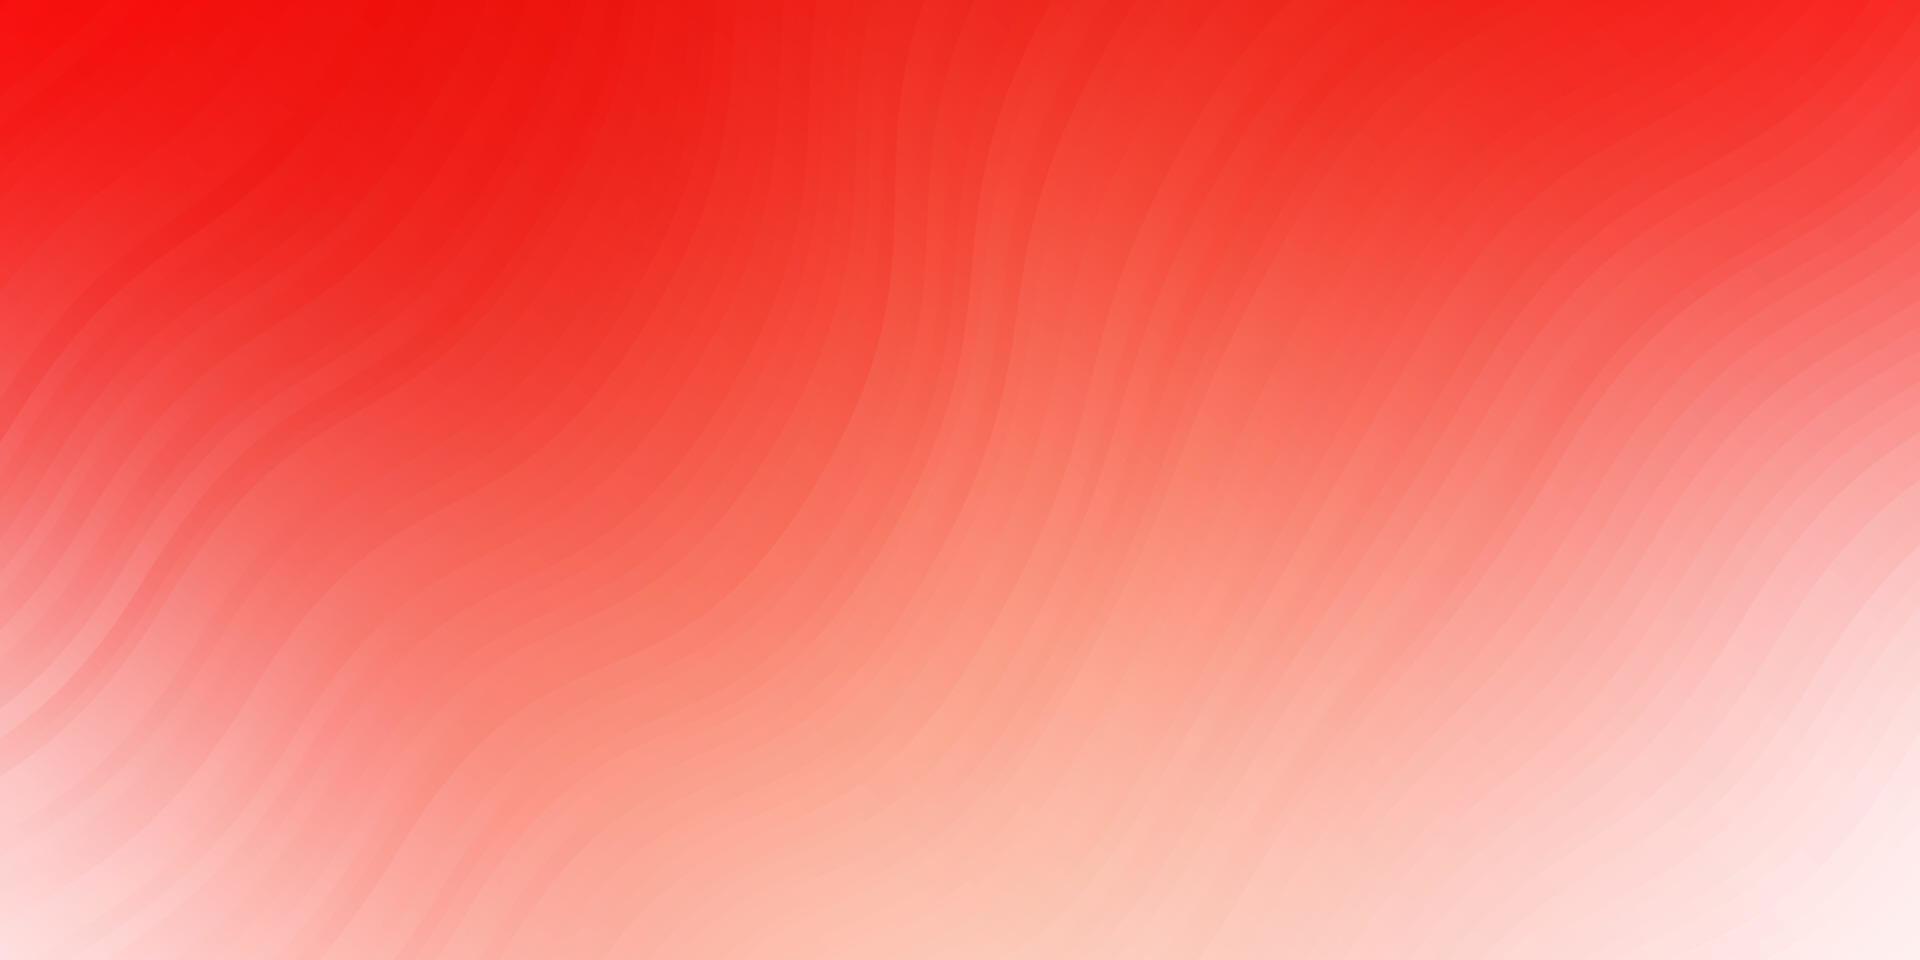 Light Red vector background with lines.